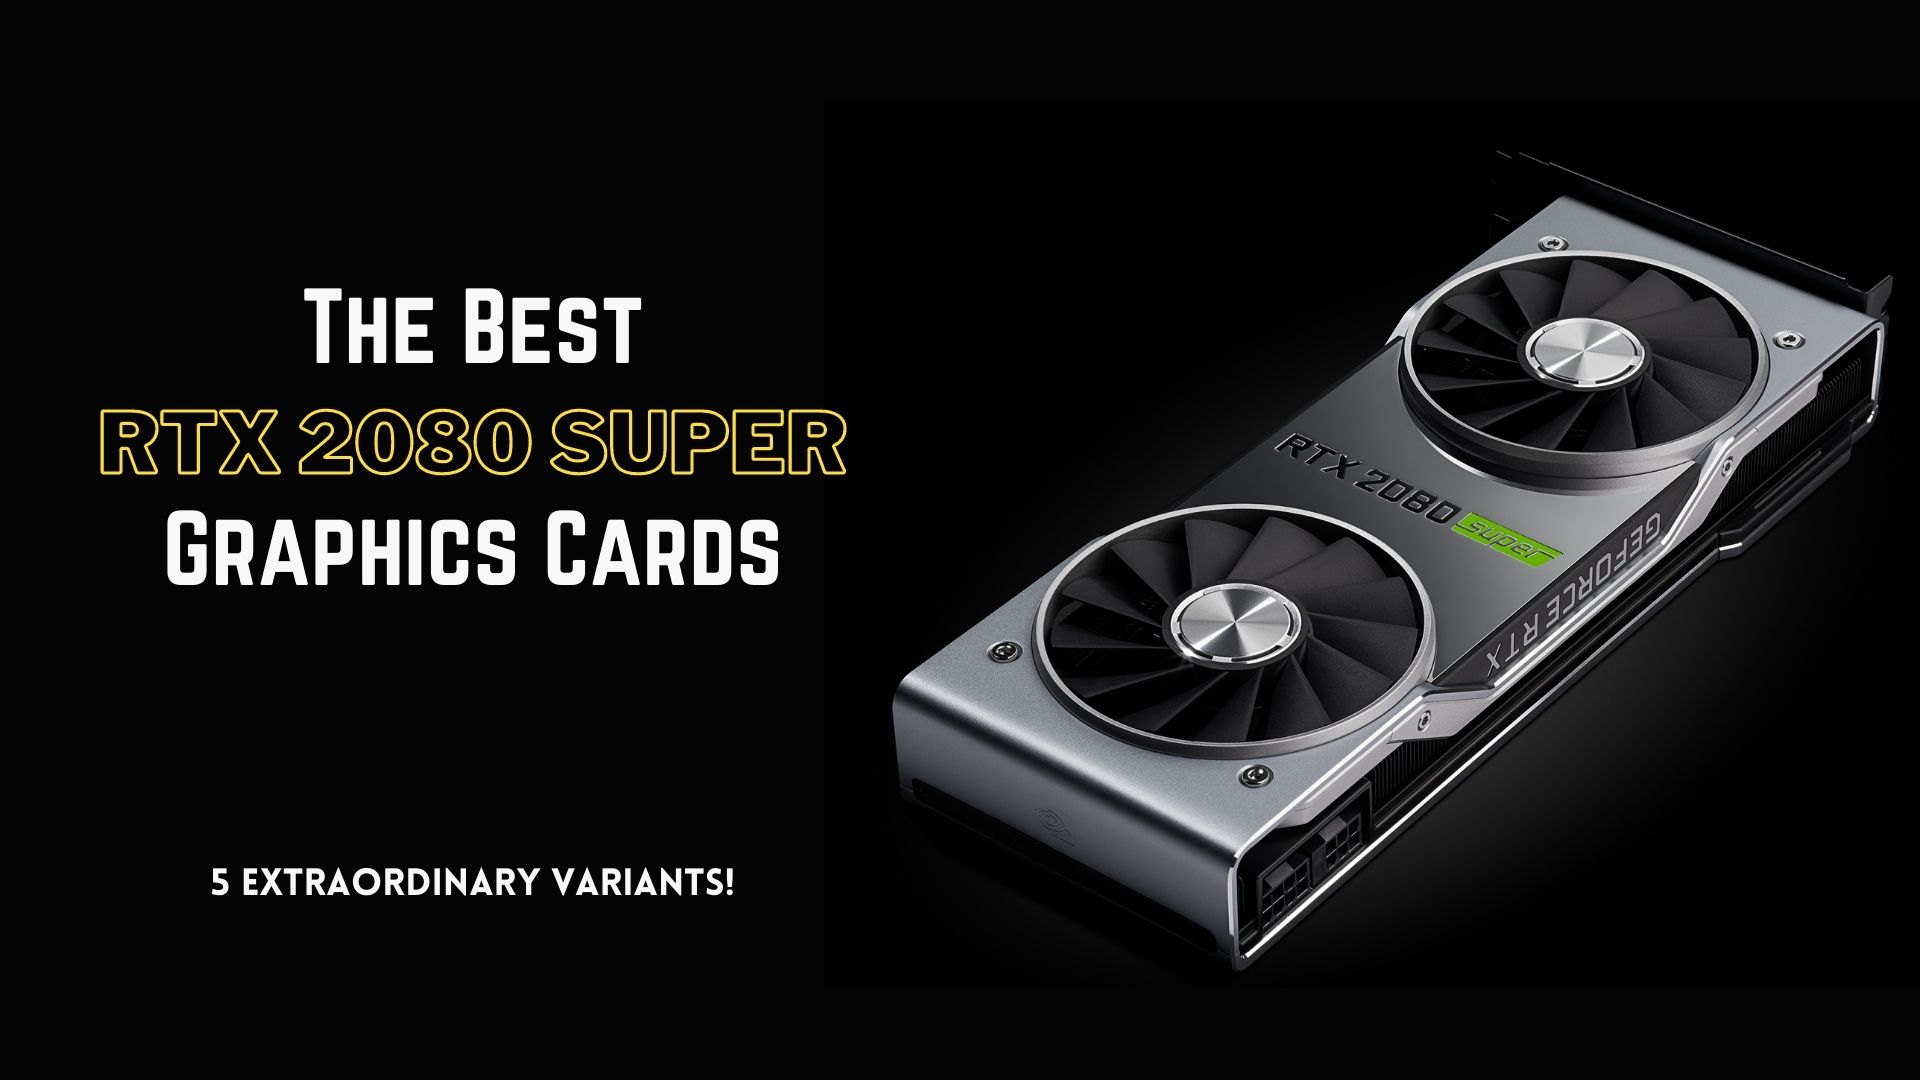 Best RTX 2080 Super Graphics Cards for High-End Gaming PCs